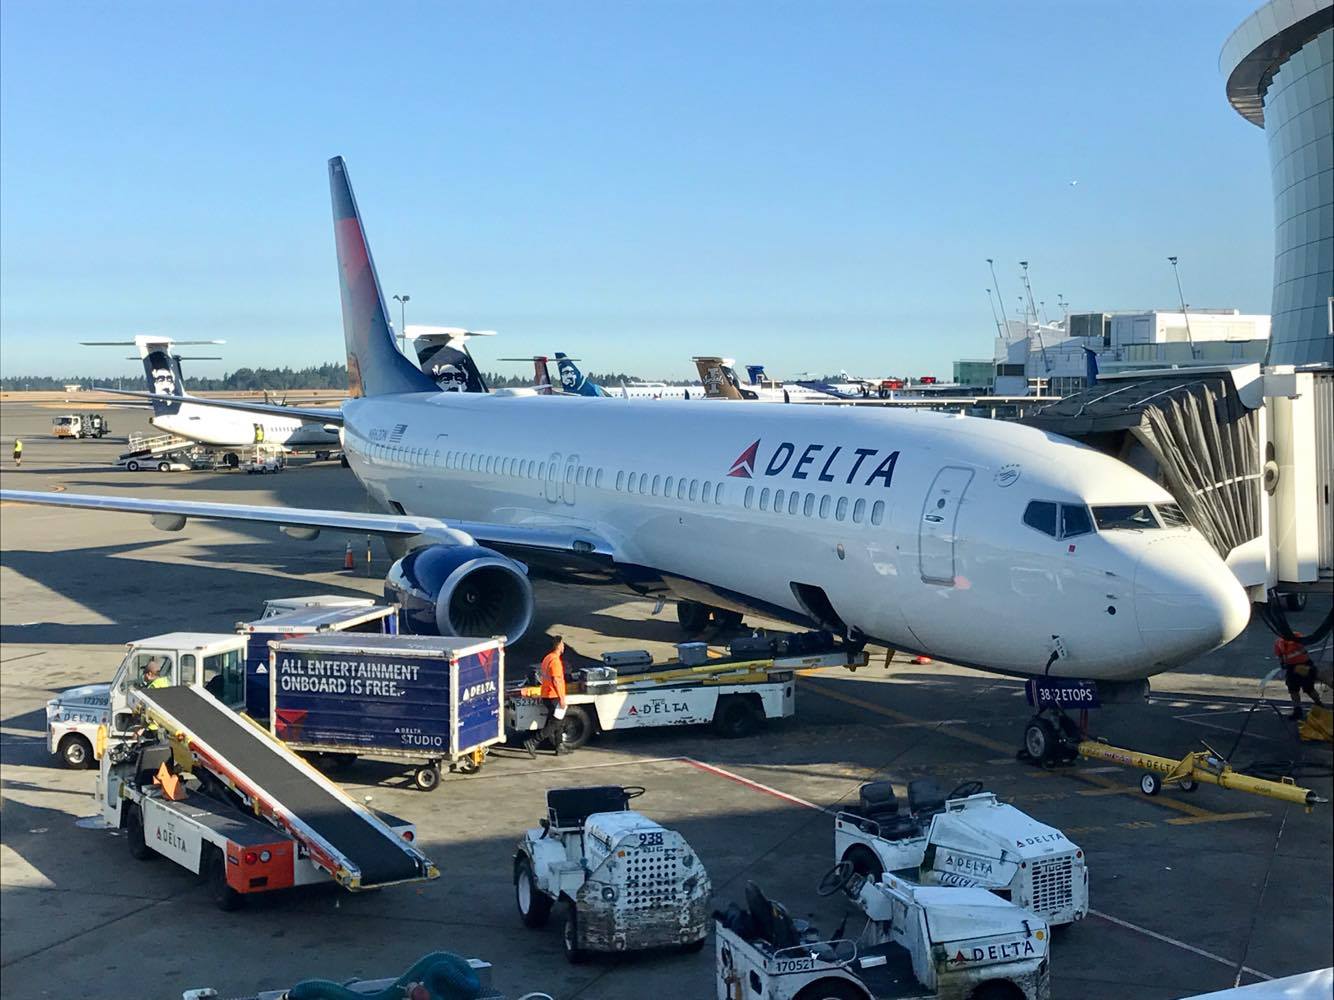 Delta Flight Makes Emergency Landing Due to Full Toilets Onboard - Points Miles & Martinis